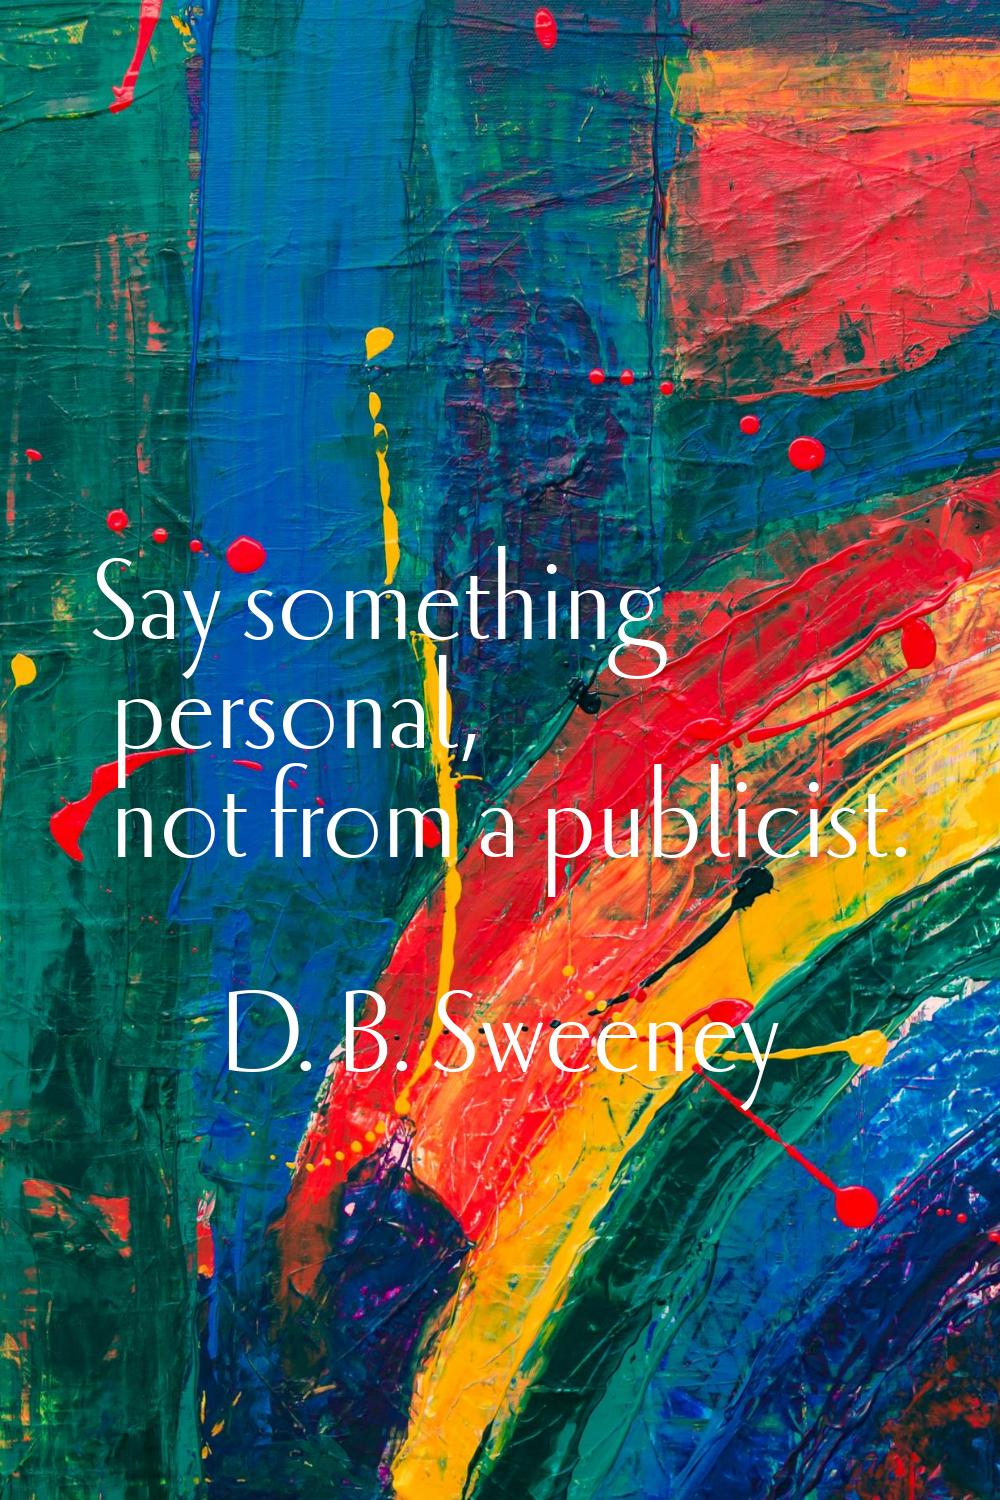 Say something personal, not from a publicist.